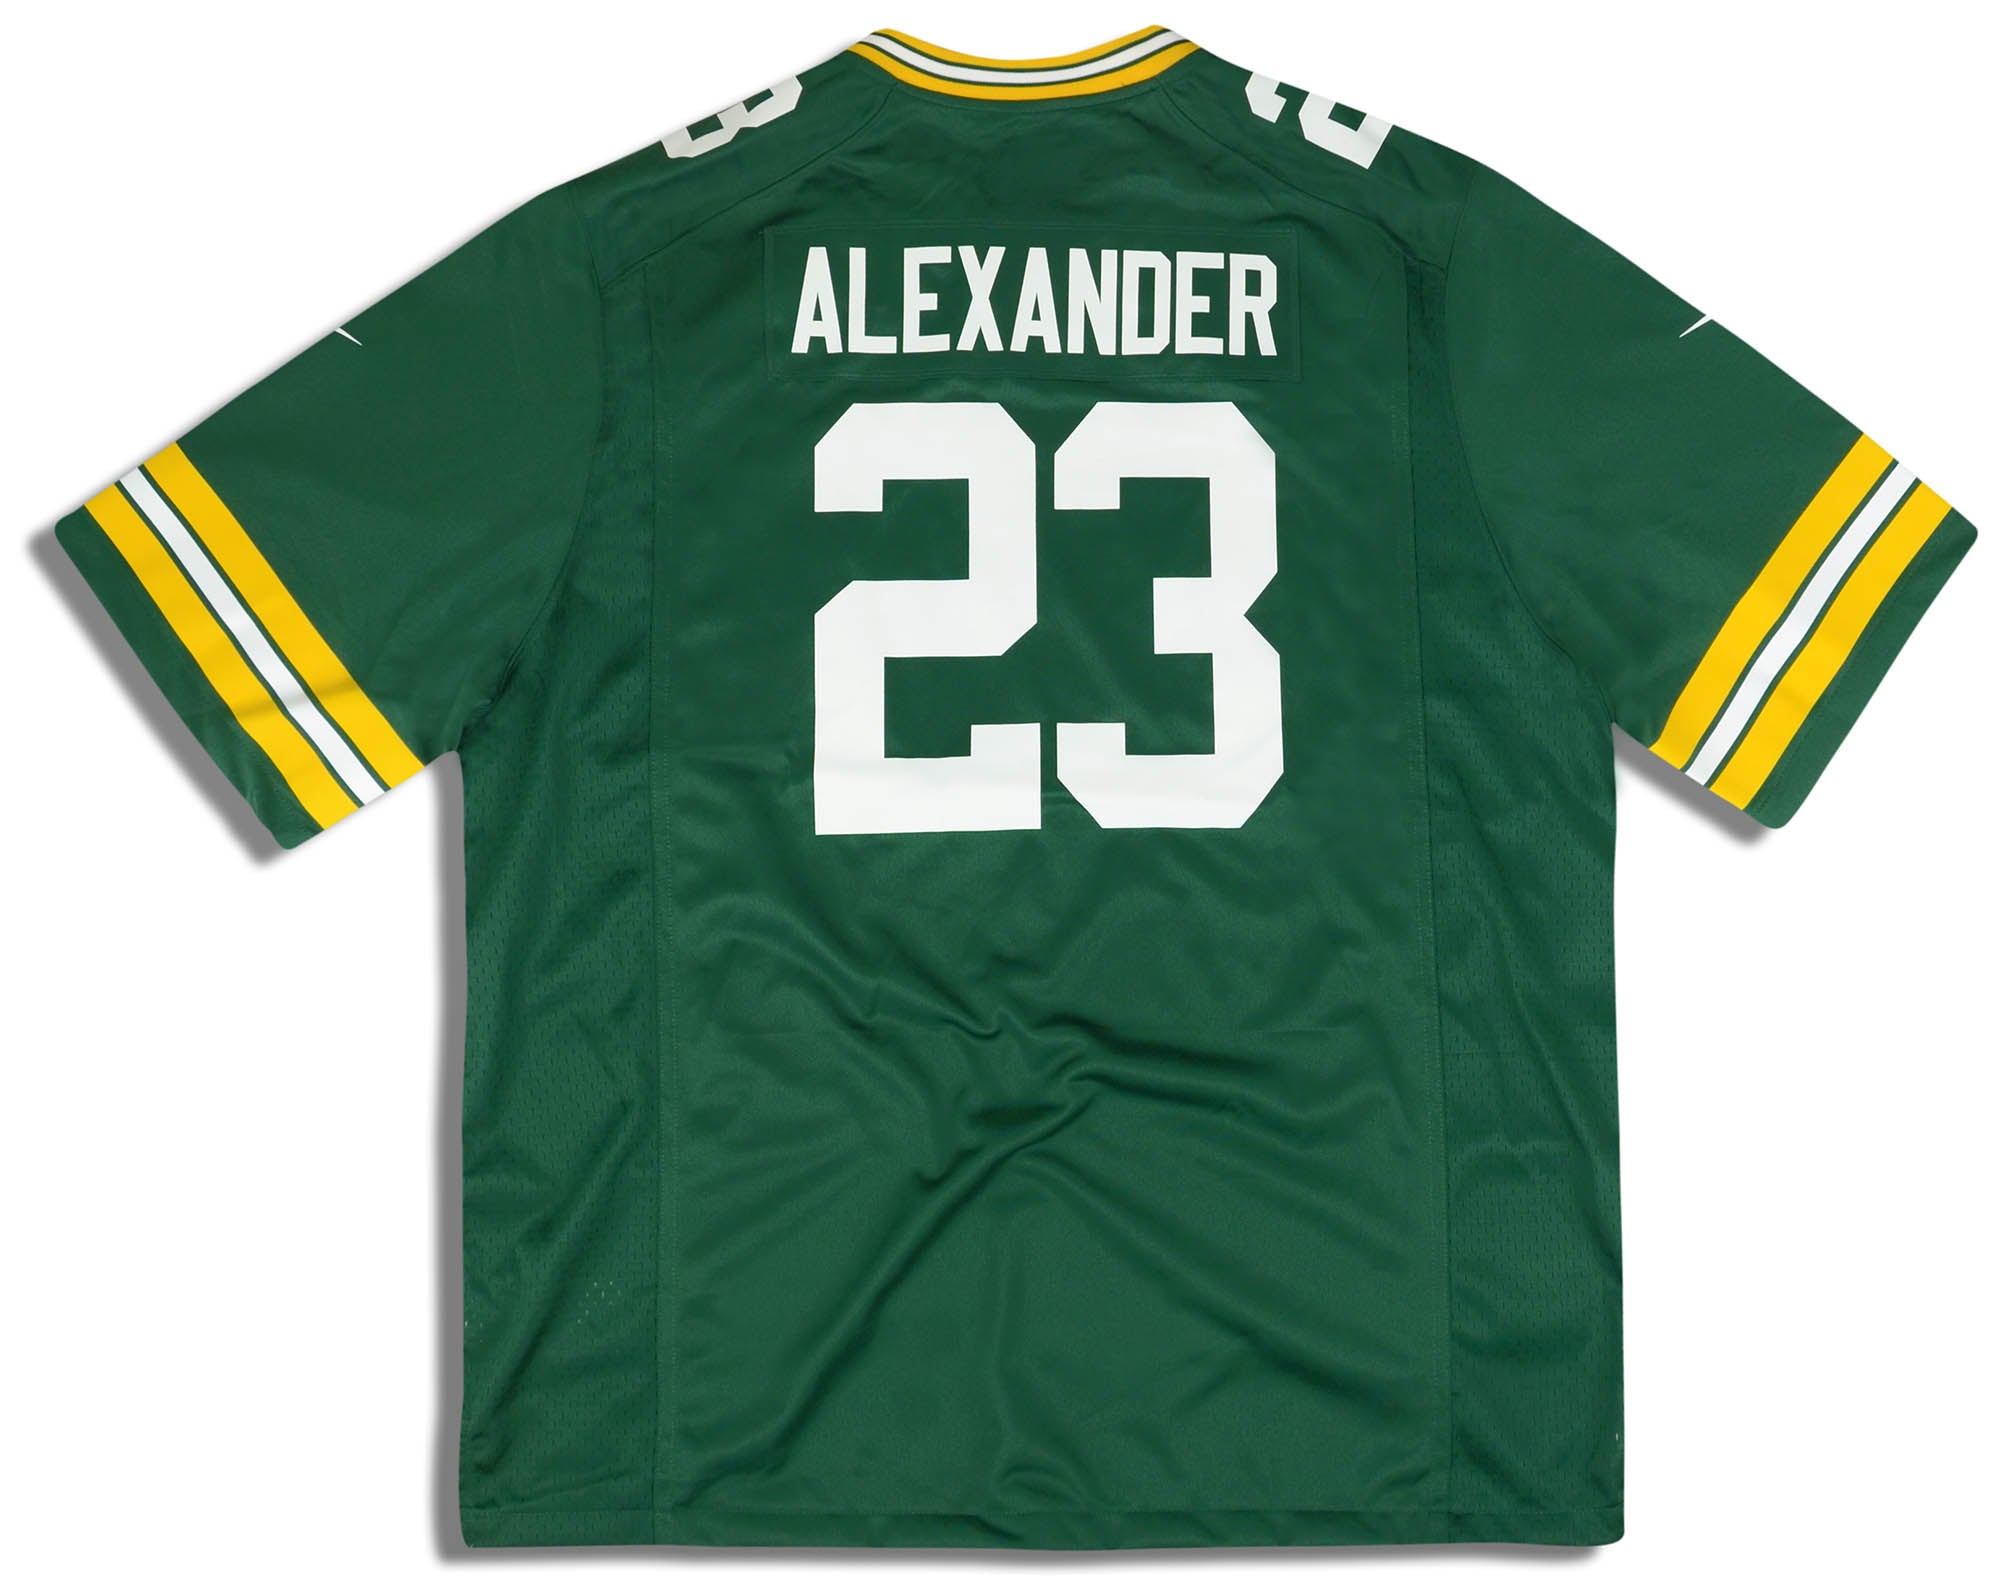 2018 GREEN BAY PACKERS ALEXANDER #23 NIKE GAME JERSEY (HOME) XXL - W/TAGS